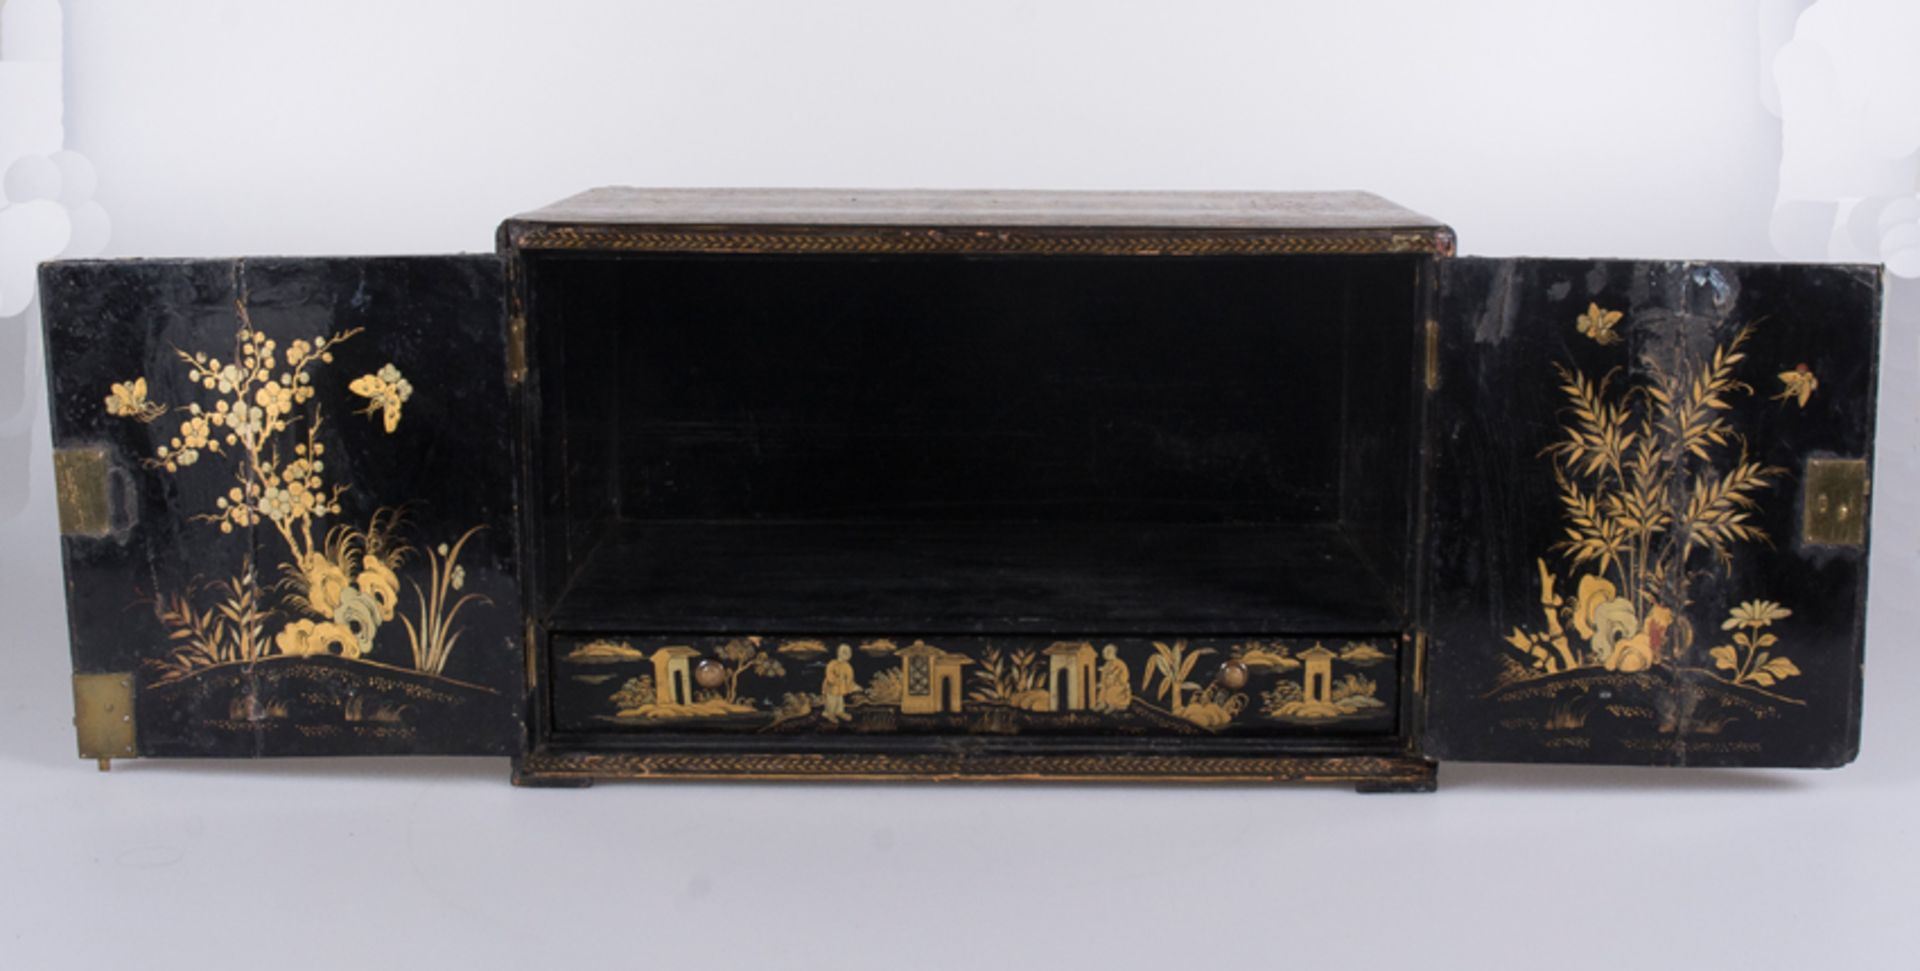 Lacquered and gilded wooden cabinet. 19th century. Qing Dynasty (1644-1912) or Regency. - Image 3 of 11